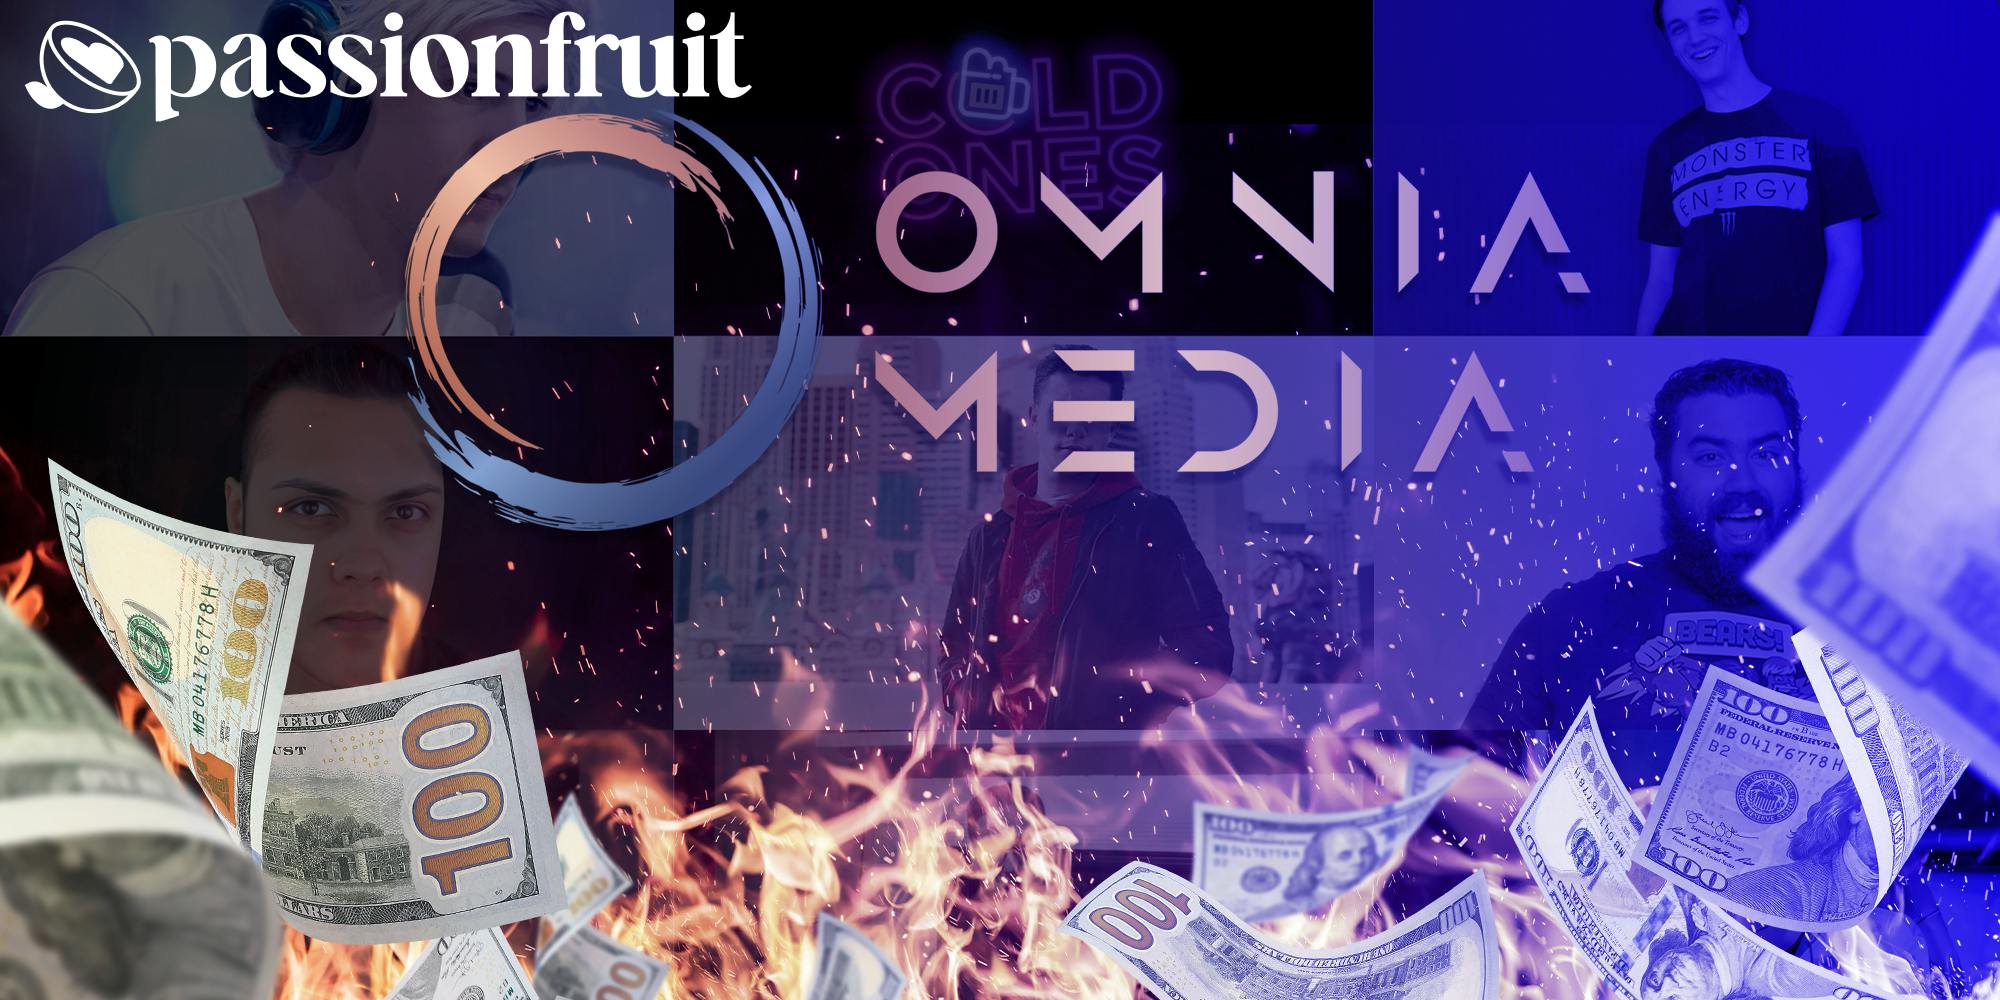 enthusiast gaming omnia media logo next to images of youtubers and money on fire with a passionfruit logo